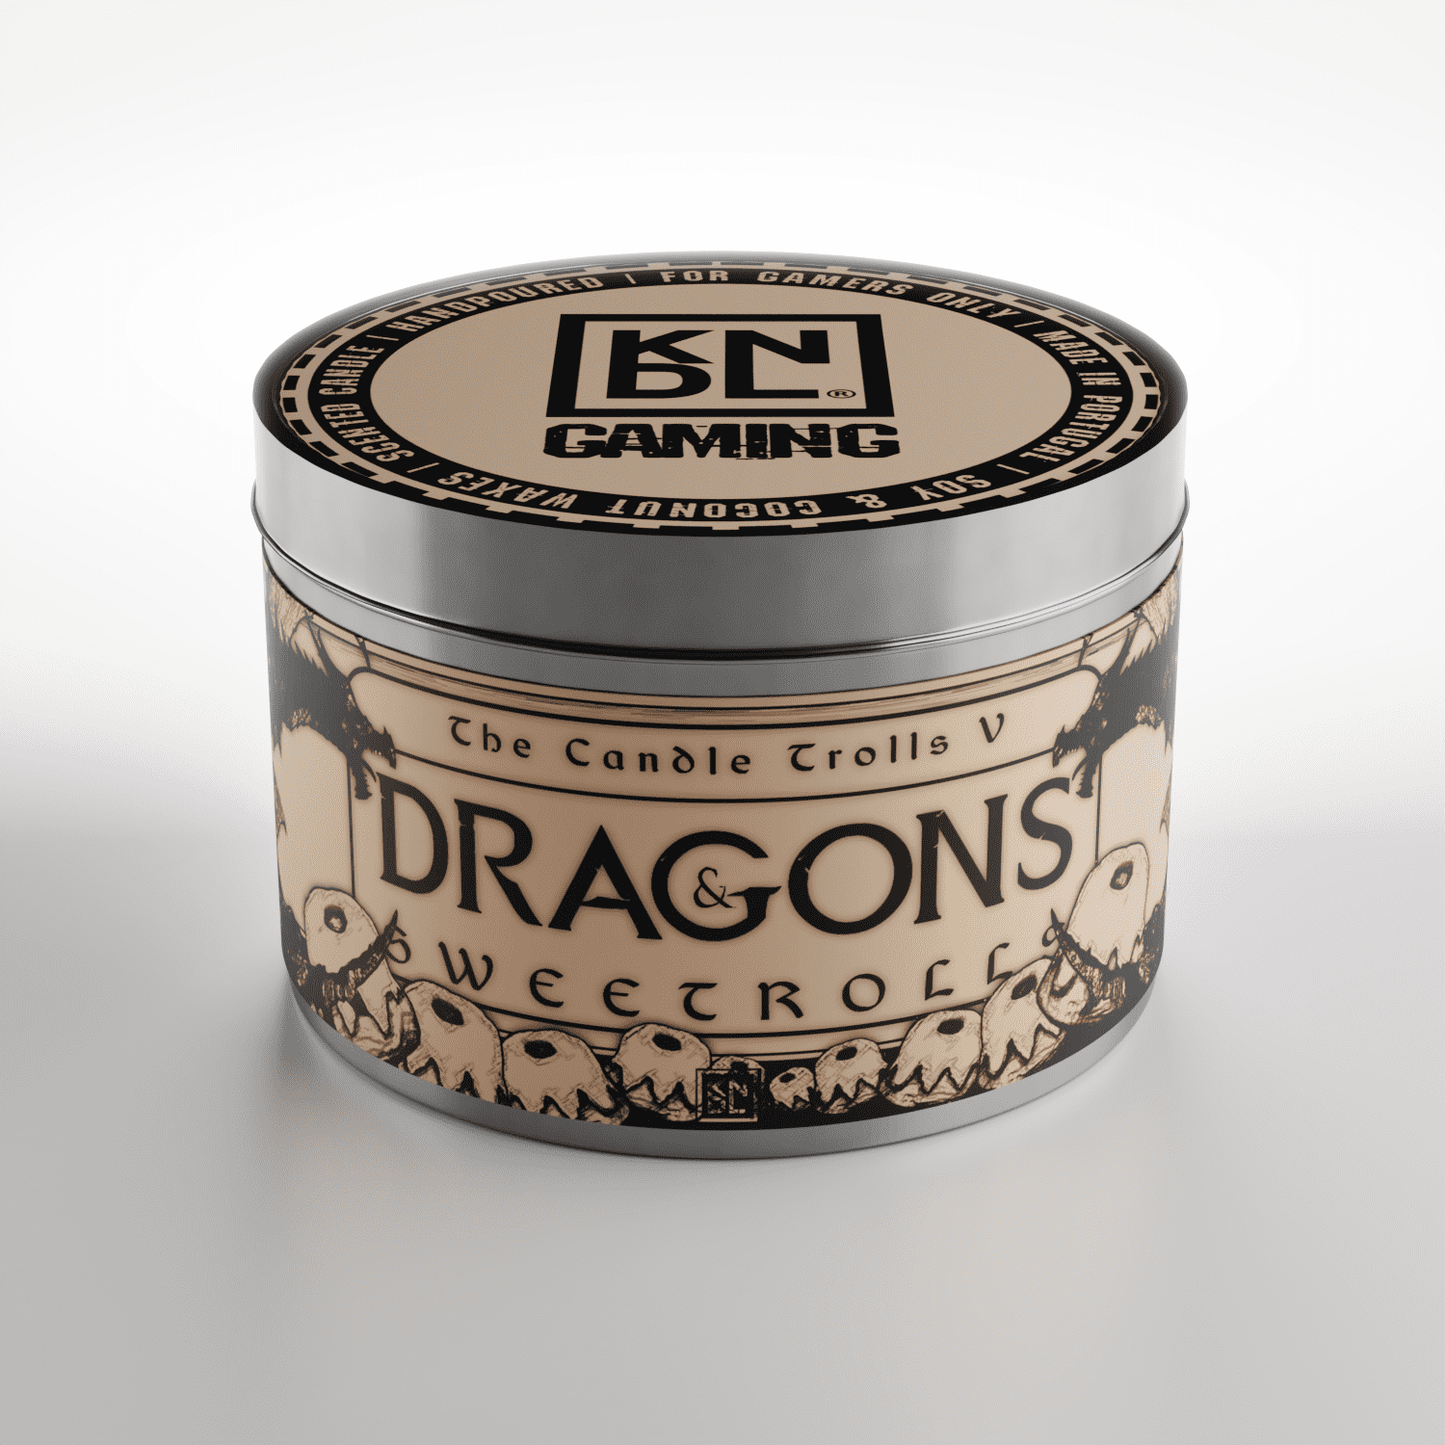 TIN NR 09 | DRAGONS & SWEETROLLS | SKYRIM INSPIRED SCENTED CANDLE